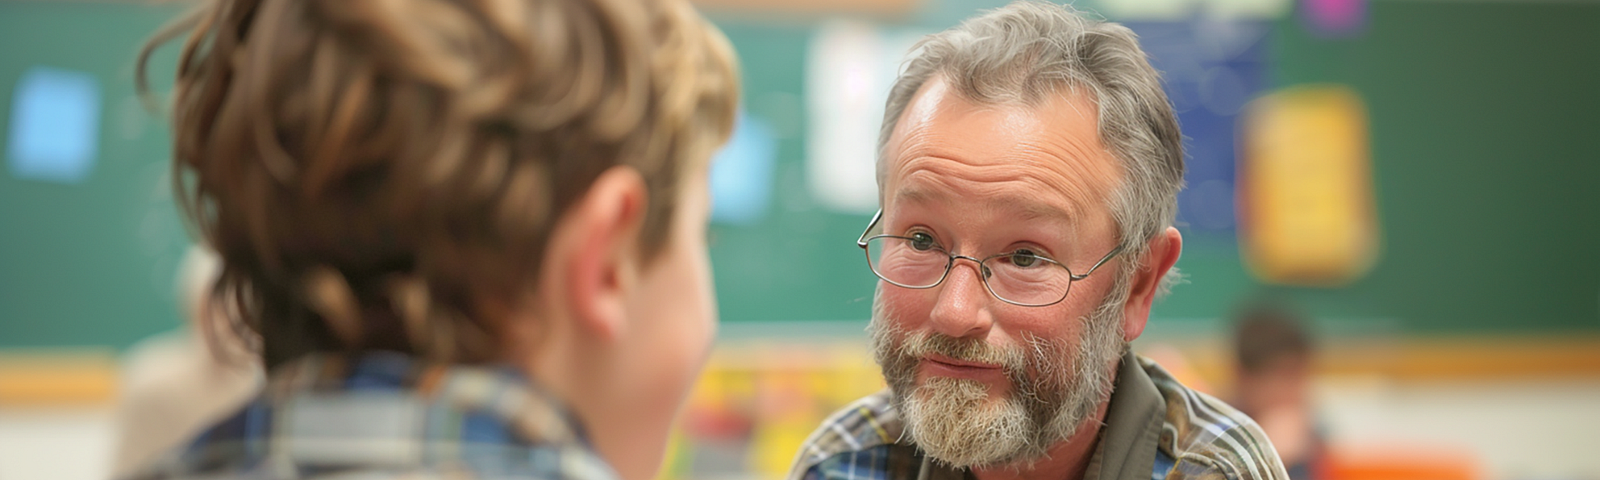 An 8-year-old student approaches his sad, tired male teacher in classwith a pleasant greeting.